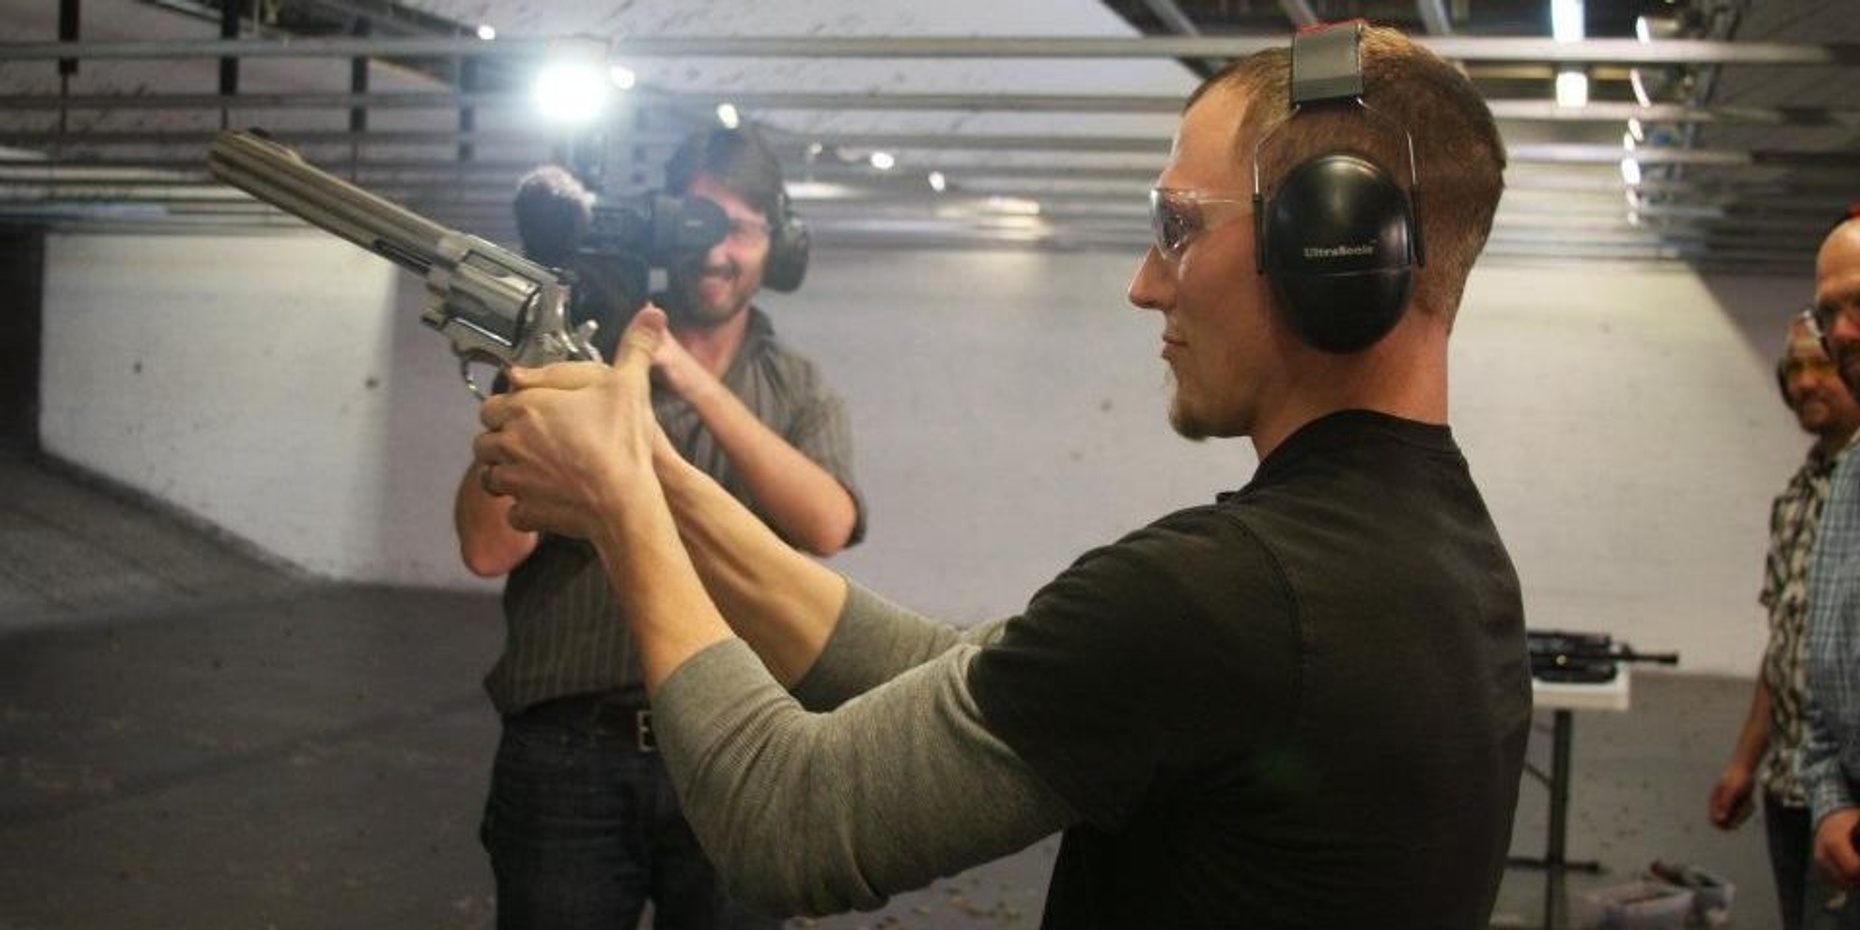 Shooting Practice with Film-Famous Firearms in Las Vegas